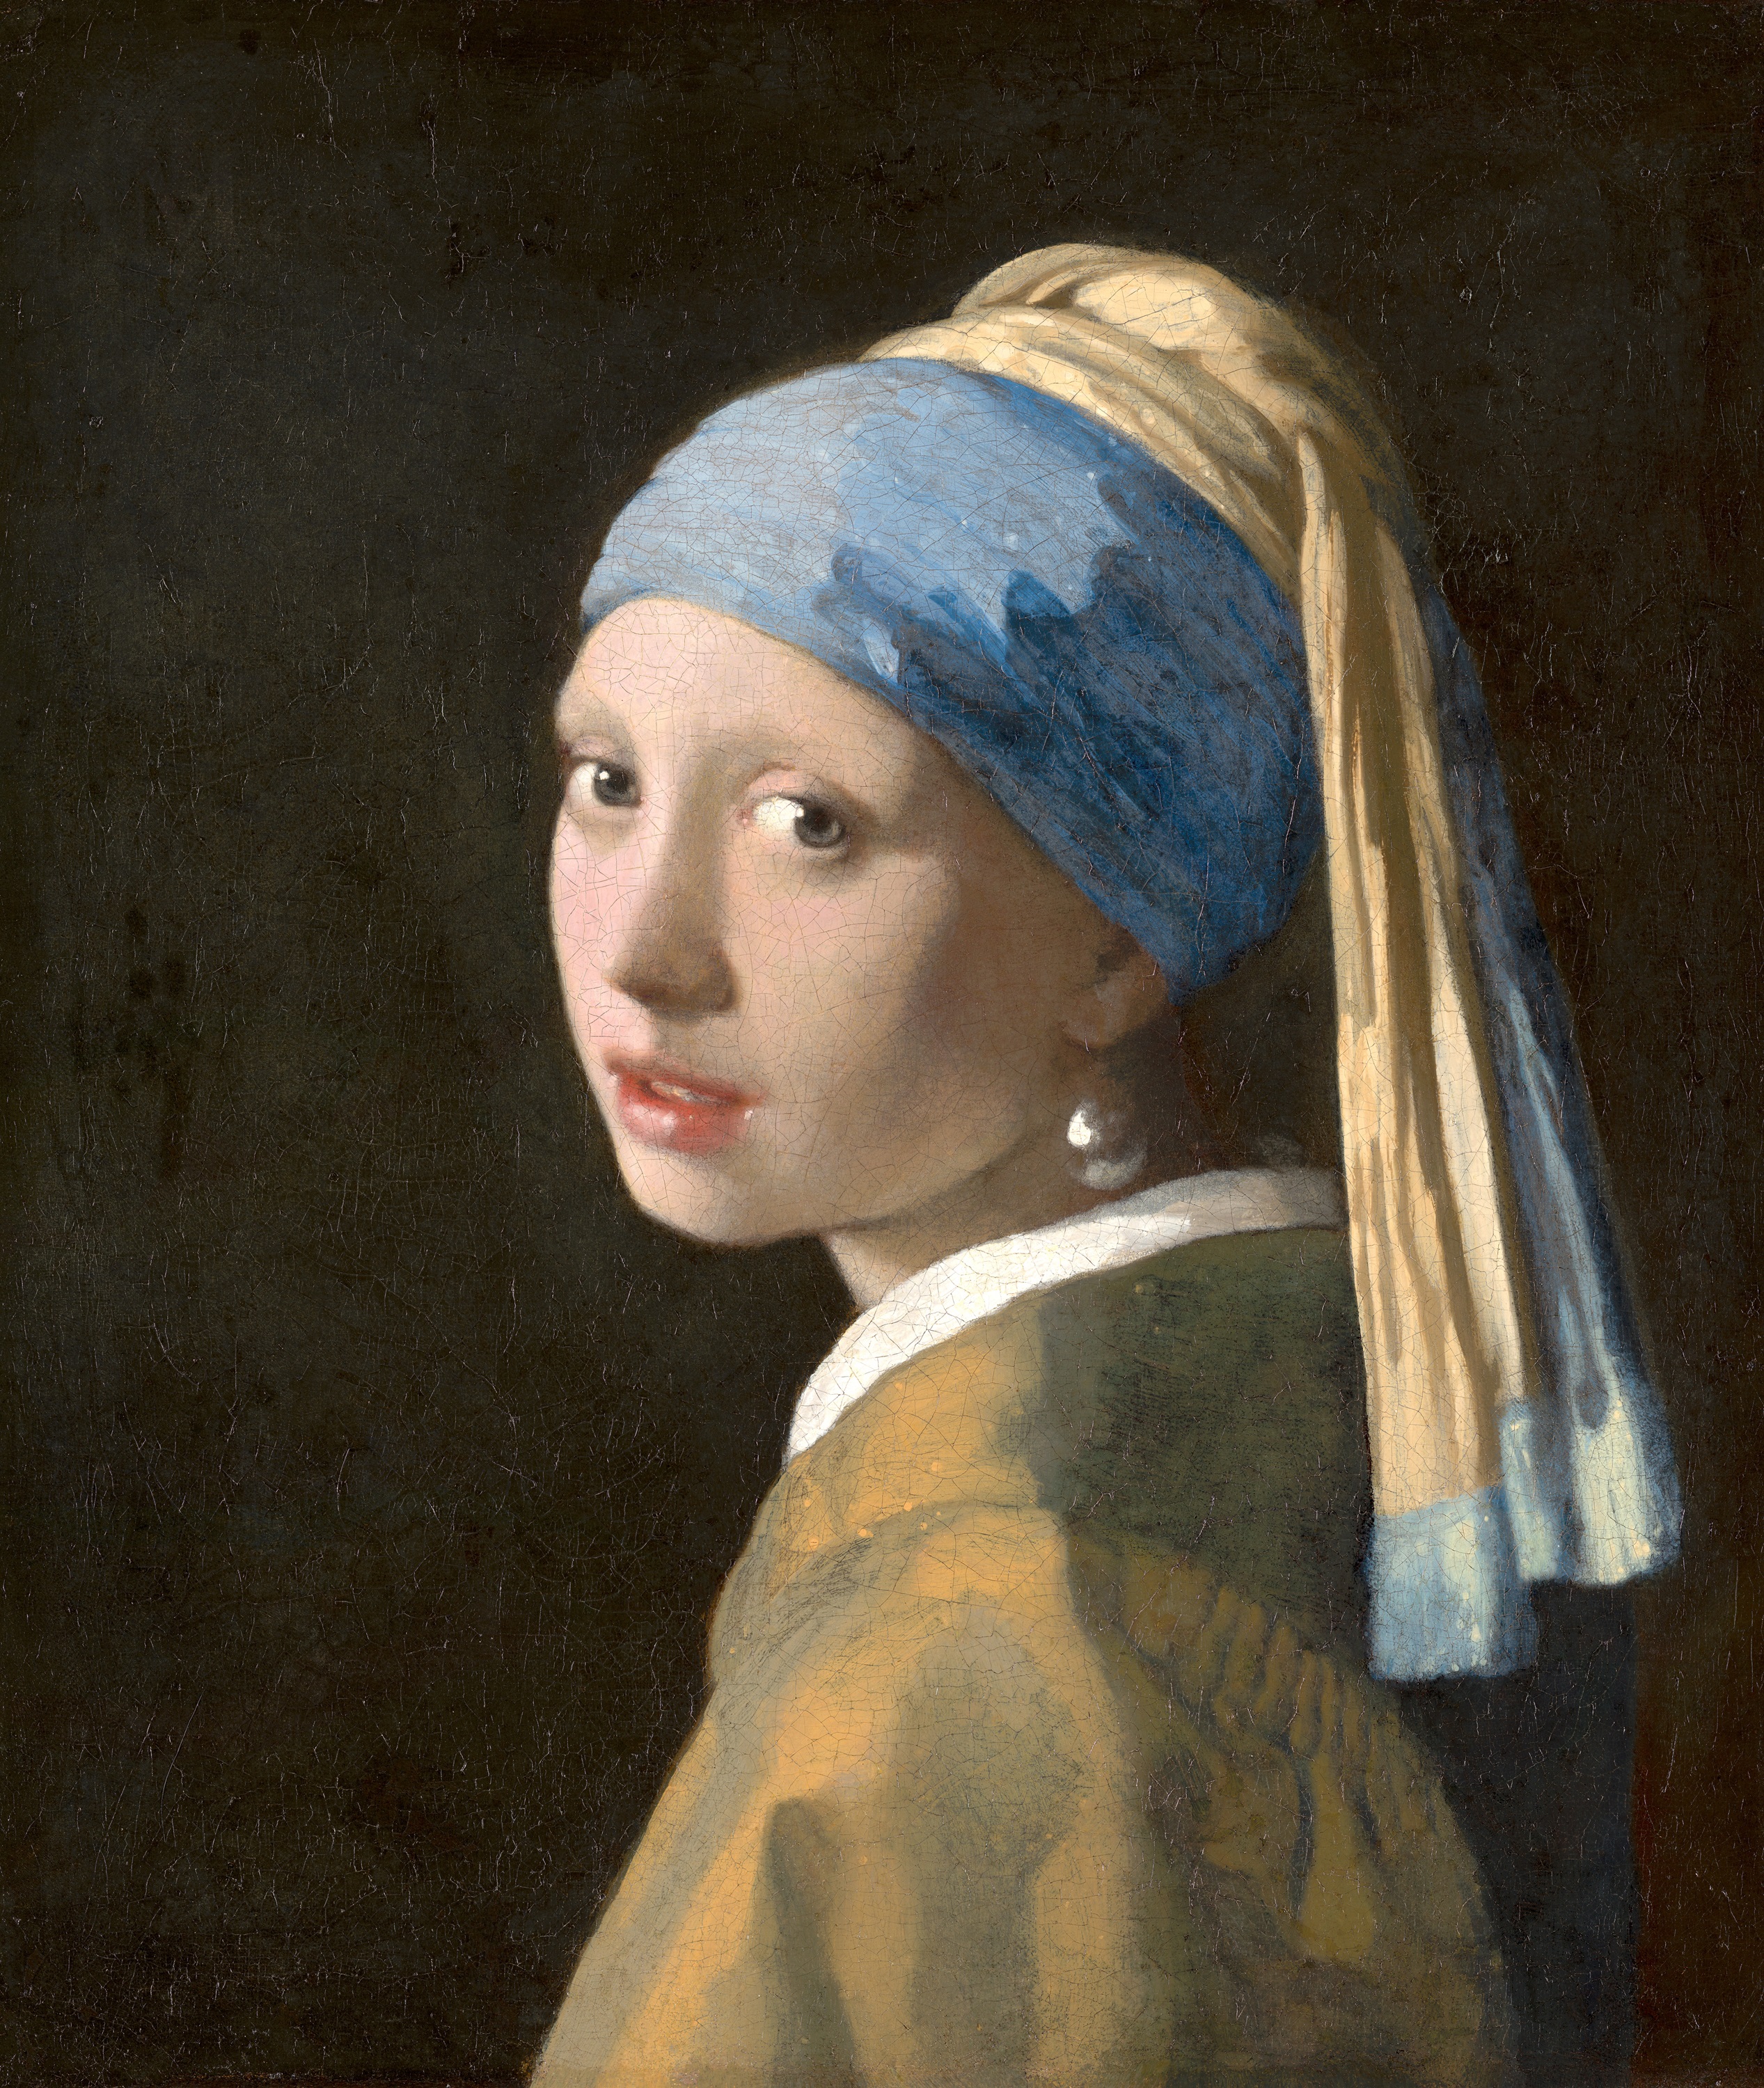 Girl with a Pearl Earring by Johannes Vermeer - c. 1665 - 45 x 39 cm Mauritshuis, The Hague